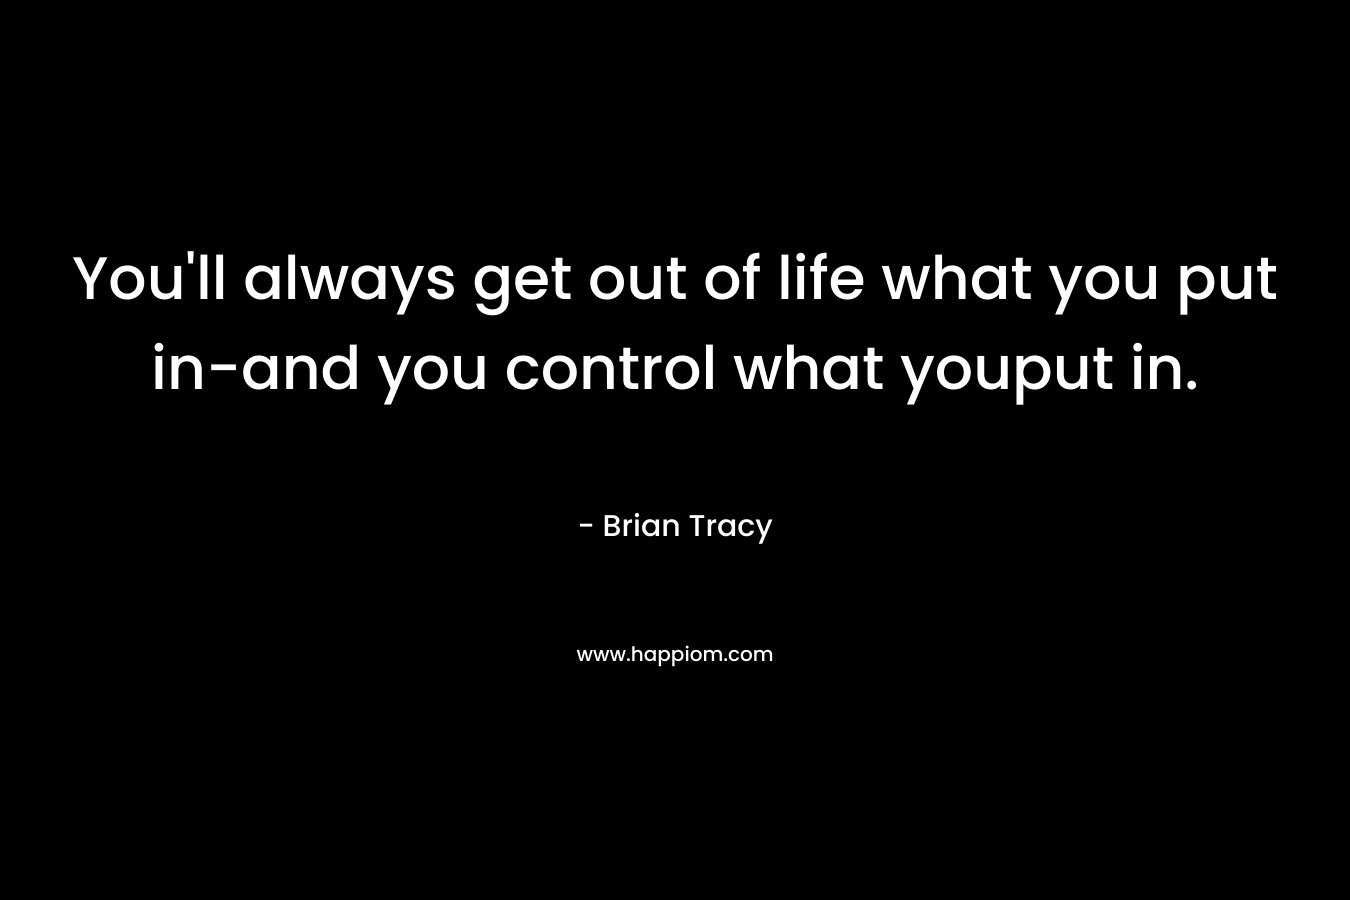 You’ll always get out of life what you put in-and you control what youput in. – Brian Tracy